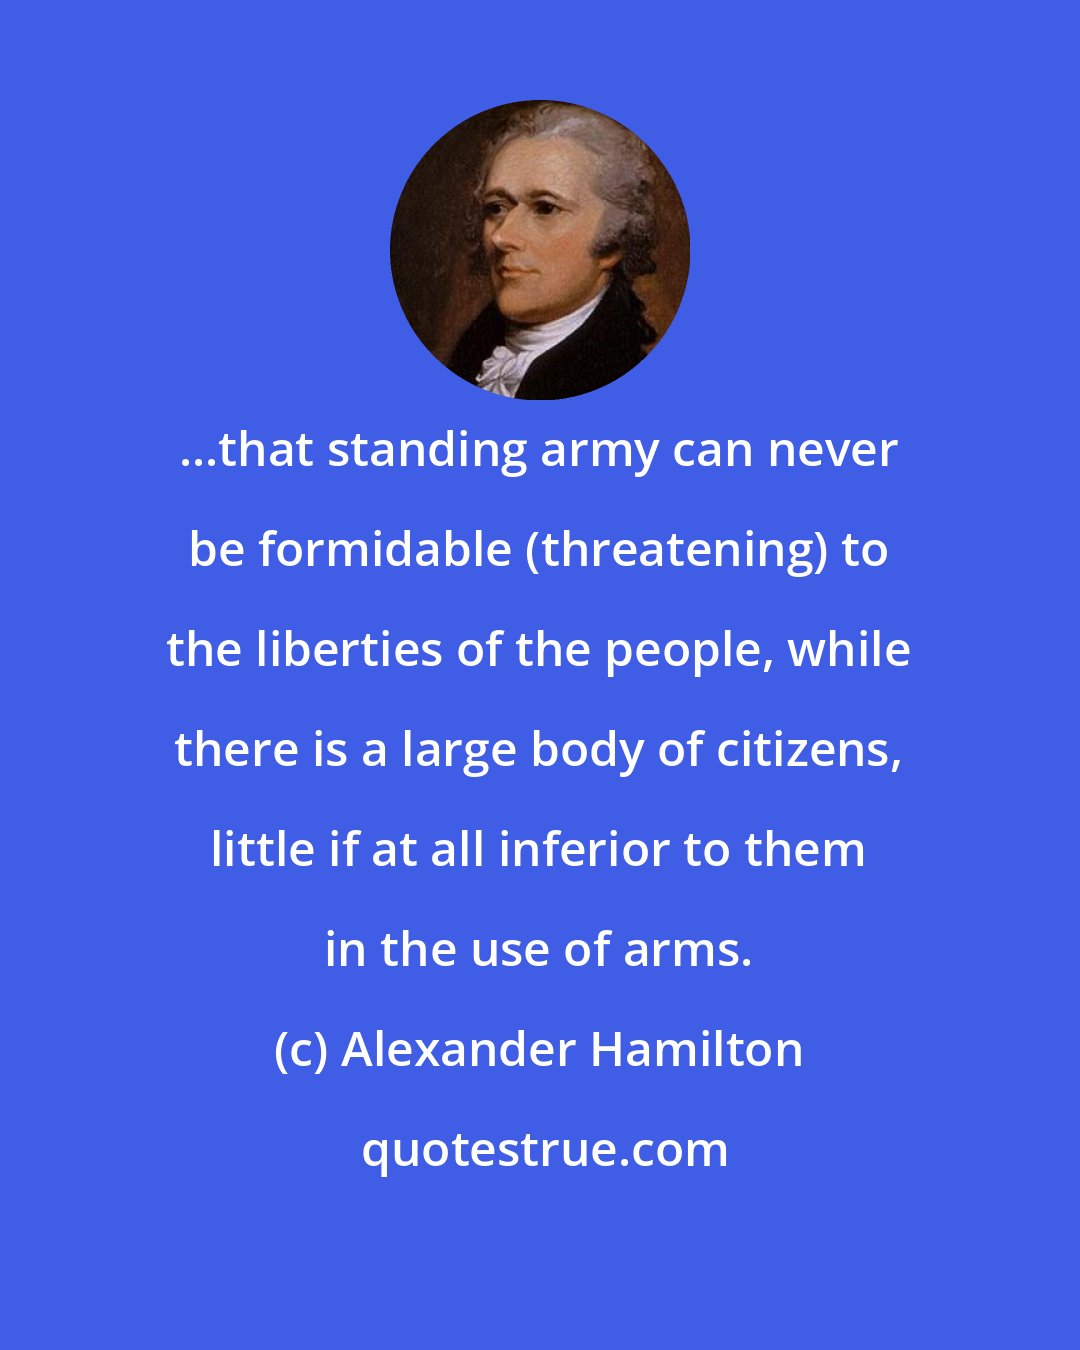 Alexander Hamilton: ...that standing army can never be formidable (threatening) to the liberties of the people, while there is a large body of citizens, little if at all inferior to them in the use of arms.